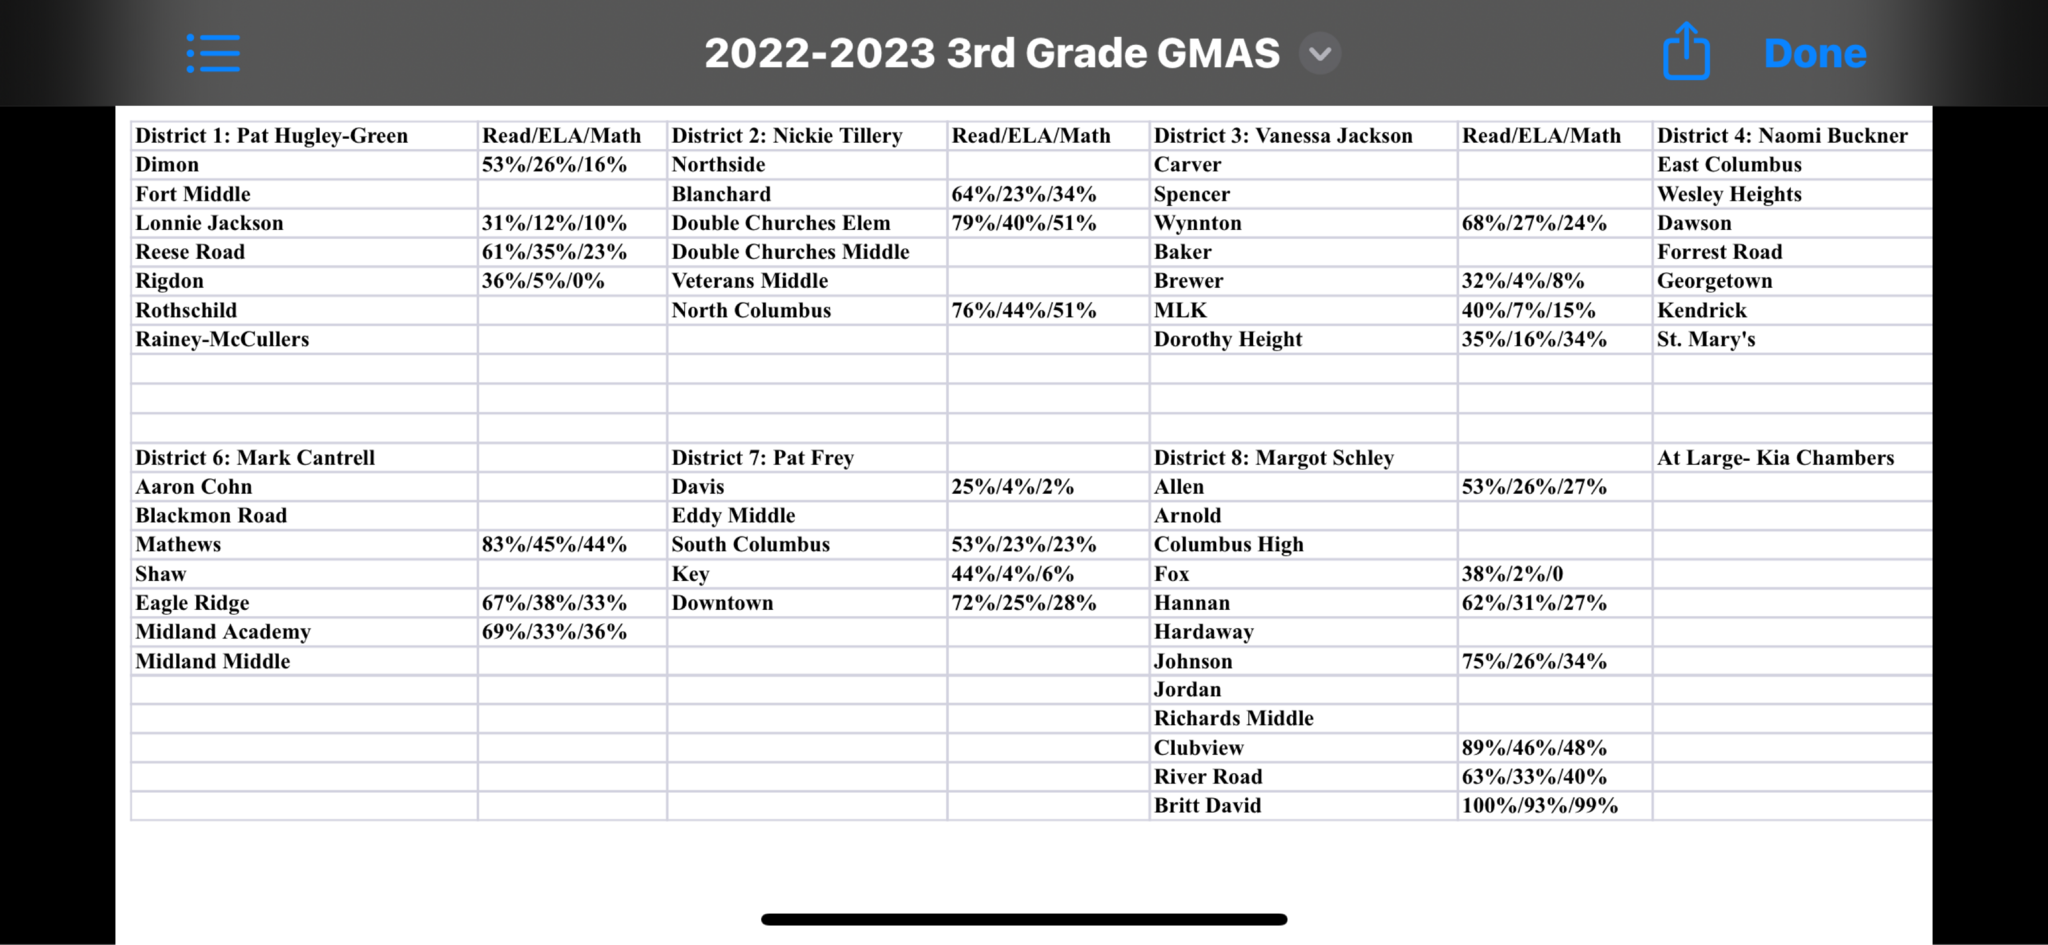 Here are the 3rd grade GMAS scores by school and Board Member. River